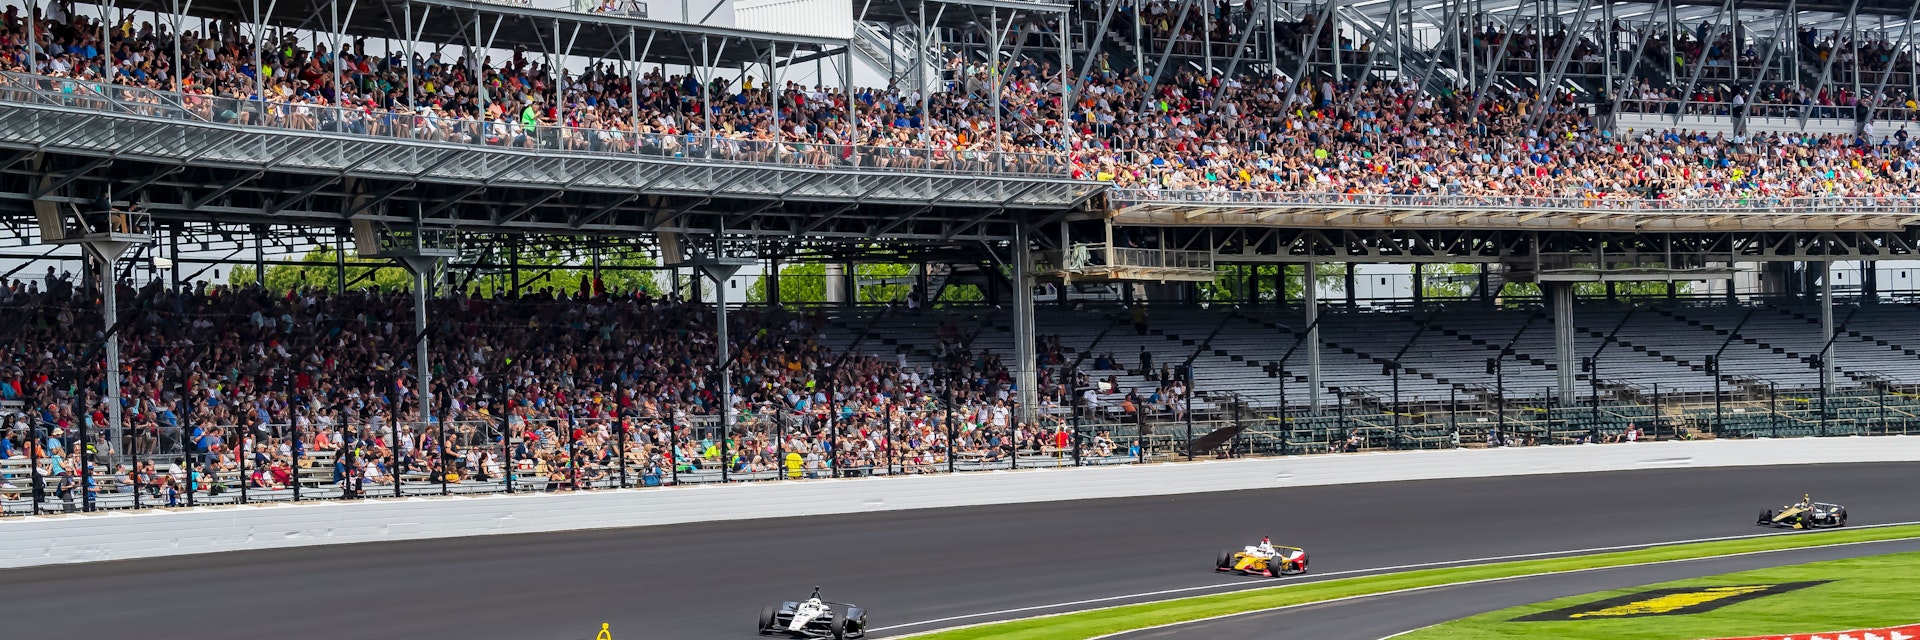 May 24, 2019 Indianapolis, IN: FELIX ROSENQVIST (R) (10) of Sweden prepares to practice for the Indianapolis 500 at Indianapolis Motor Speedway in Indianapolis, Indiana.